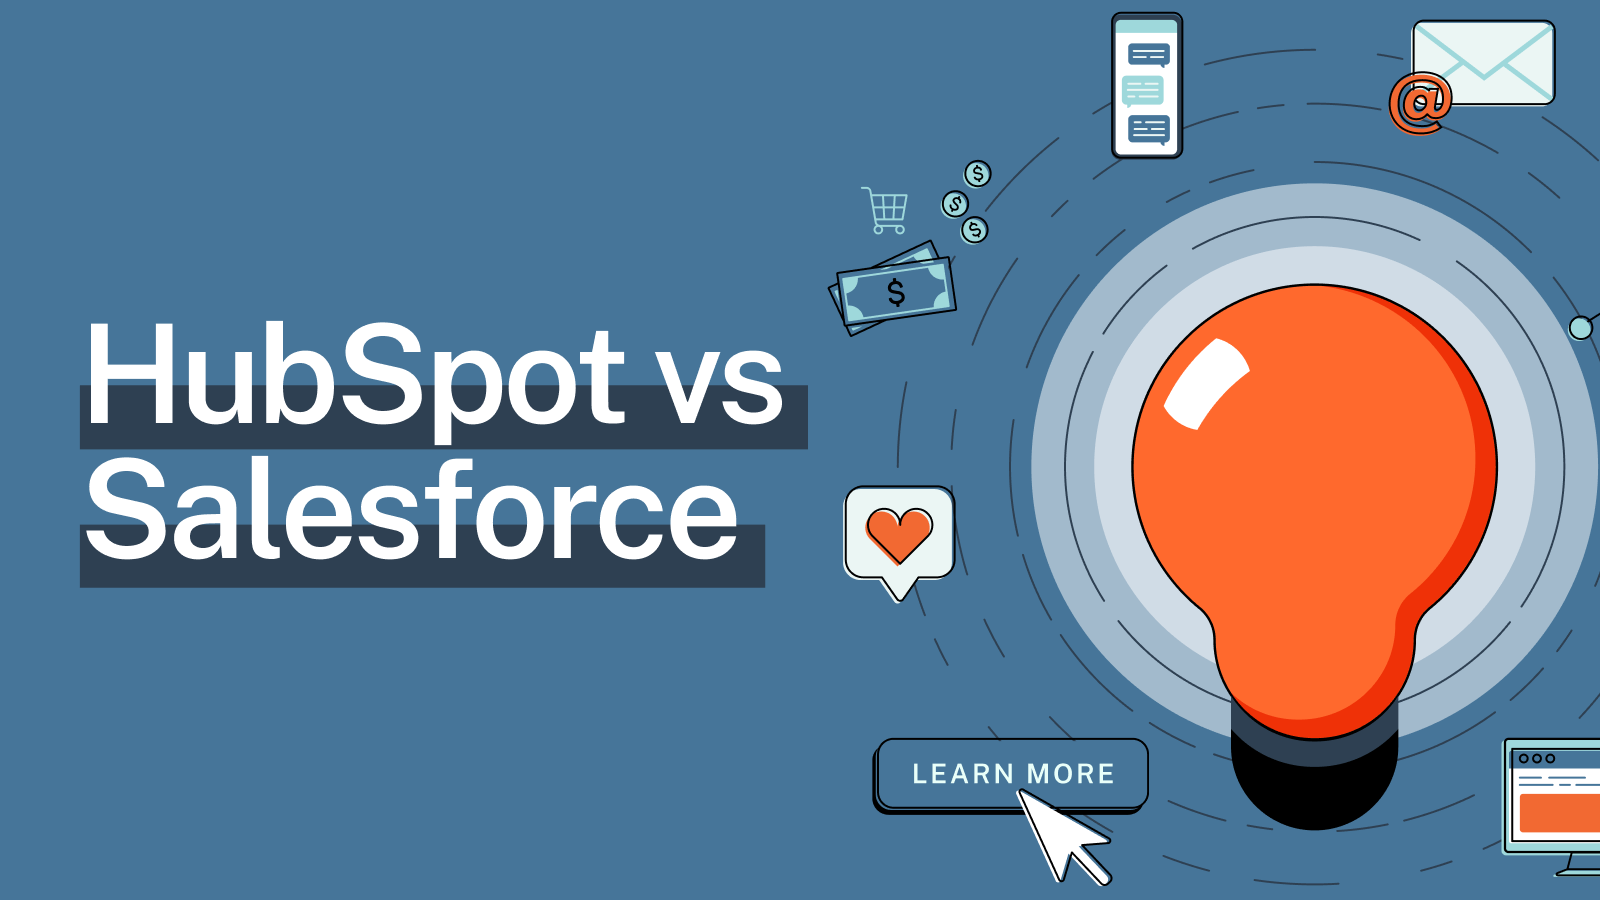 HubSpot vs Salesforce - Choosing the Right CRM for Your Nonprofit